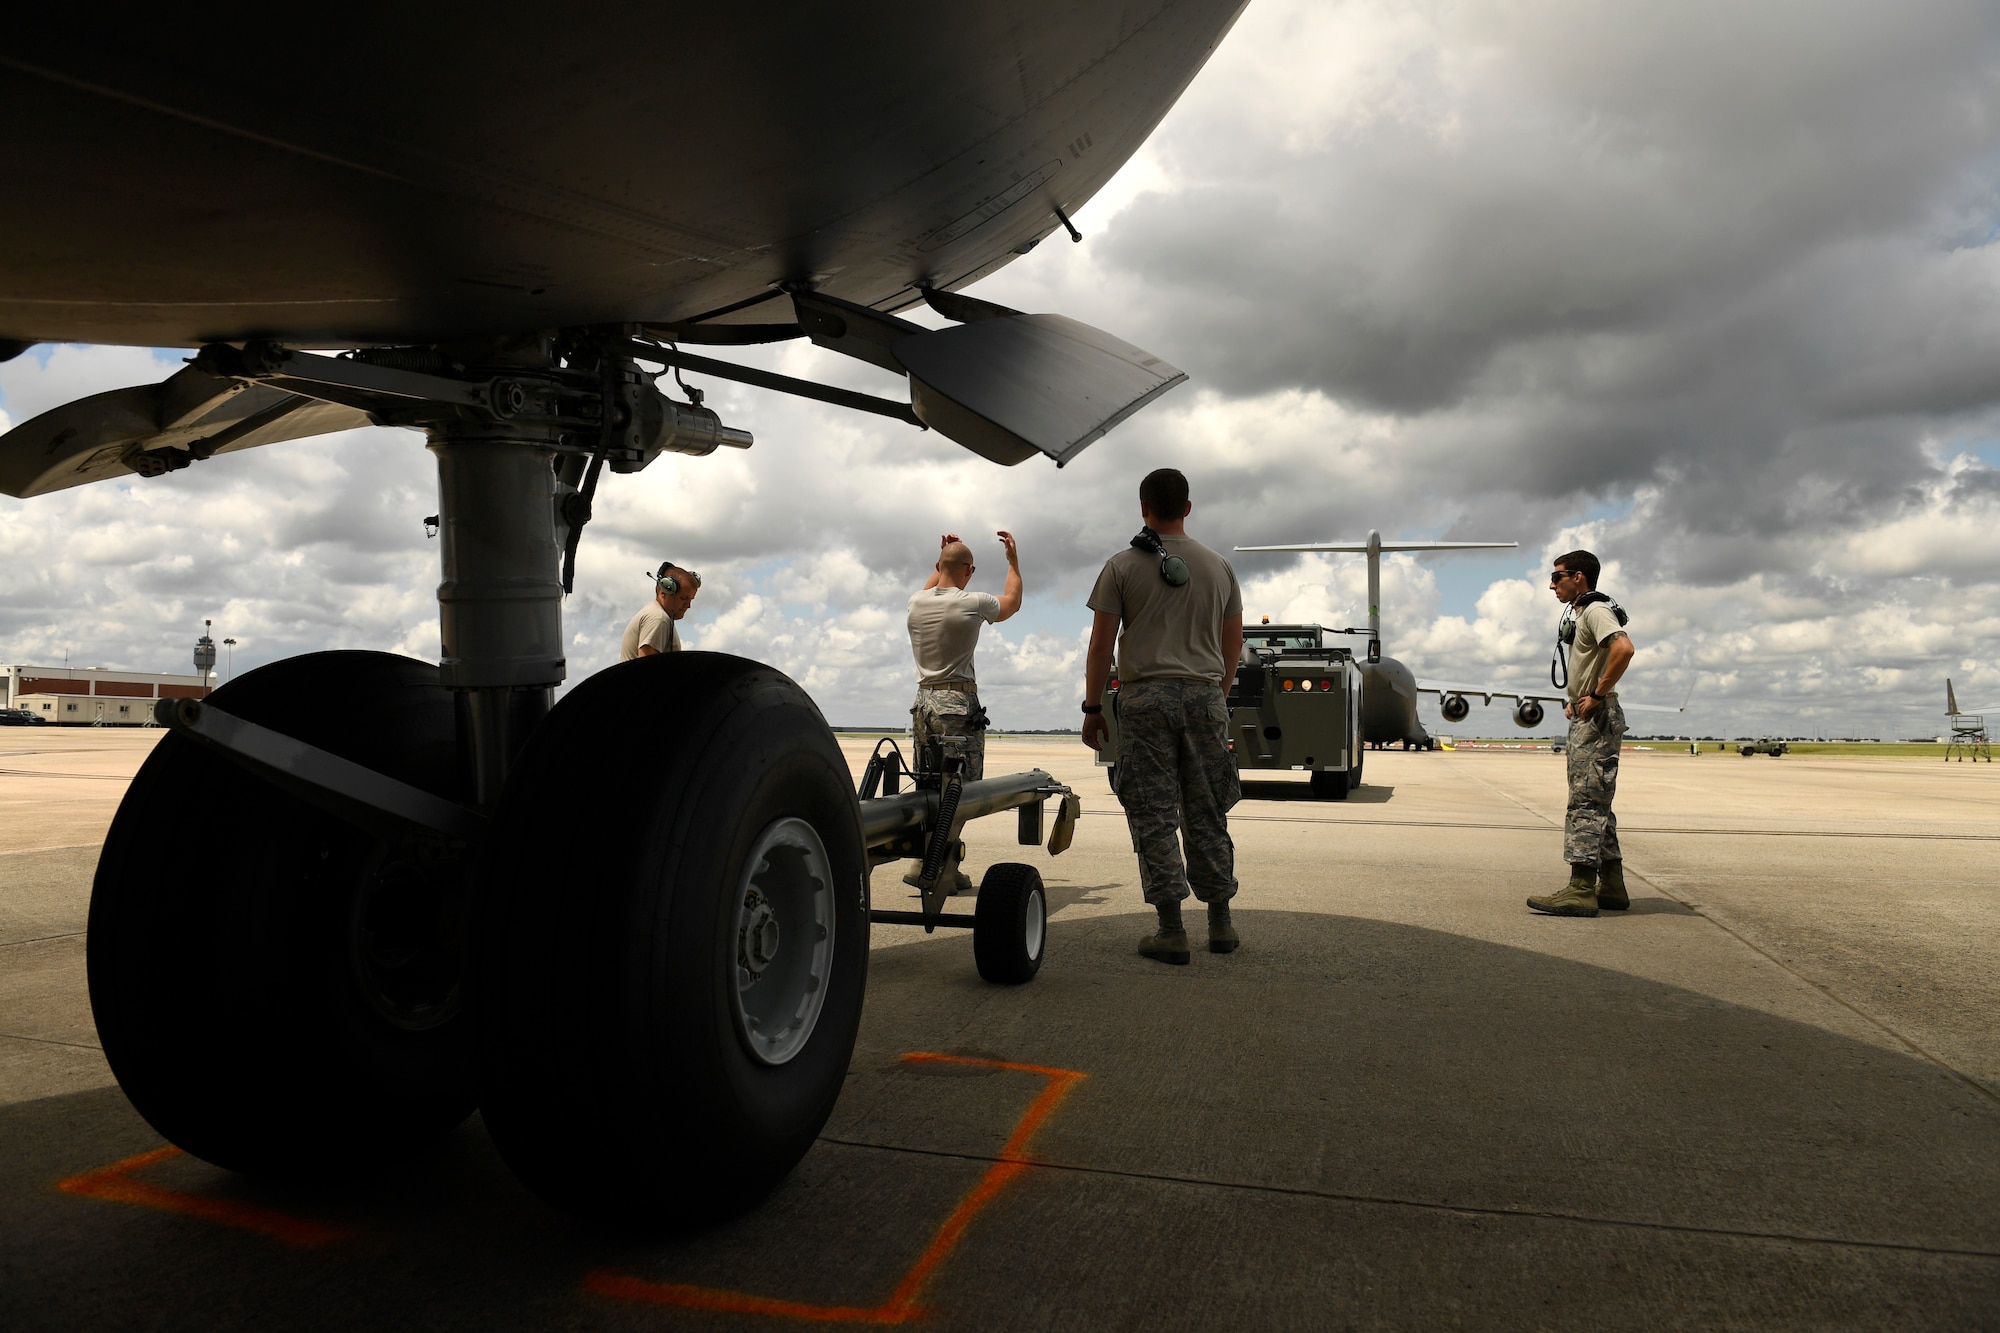 U.S. Air Force Staff Sgt. James Srackangast (center), 145th Aircraft Maintenance Squadron, gives hand and arm signals to direct a tow vehicle into position to tow a C-17 Globemaster III at the North Carolina Air National Guard Base, Charlotte Douglas International Airport, July 24, 2018. Maintenance personnel use hand and arm signals to direct each other and  ensure the safety of personnel and aircraft.